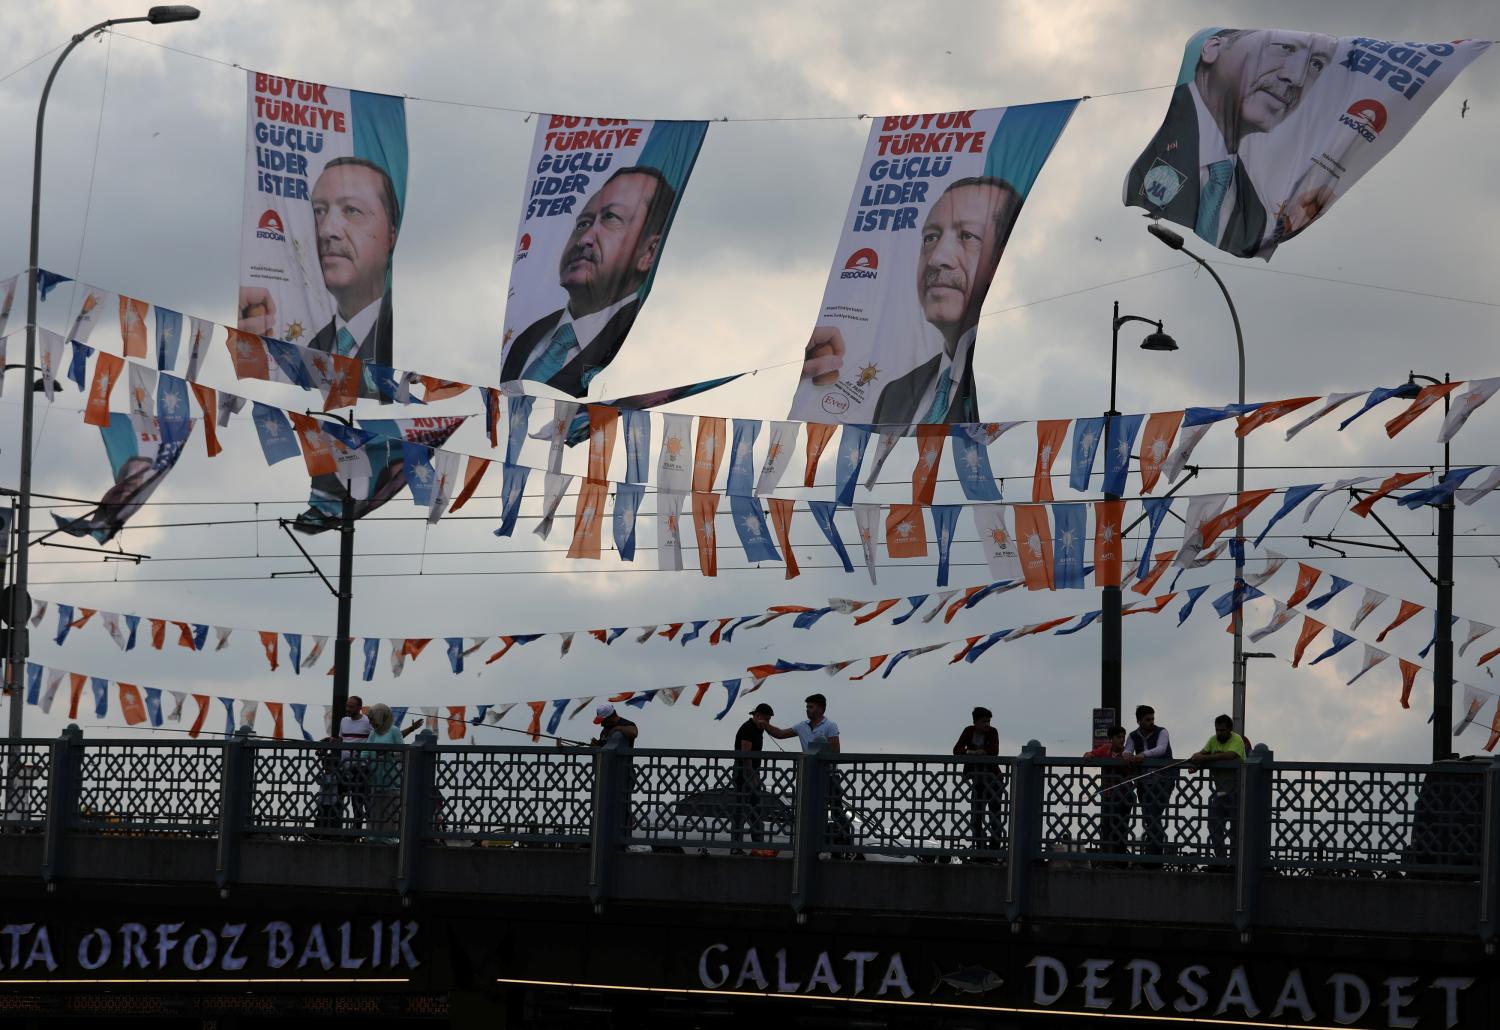 Banners of Turkish President Tayyip Erdogan and Turkey's ruling AK Party (AKP) flags hang over Galata bridge in Istanbul, Turkey, June 10, 2018. REUTERS/Goran Tomasevic - RC168349E460